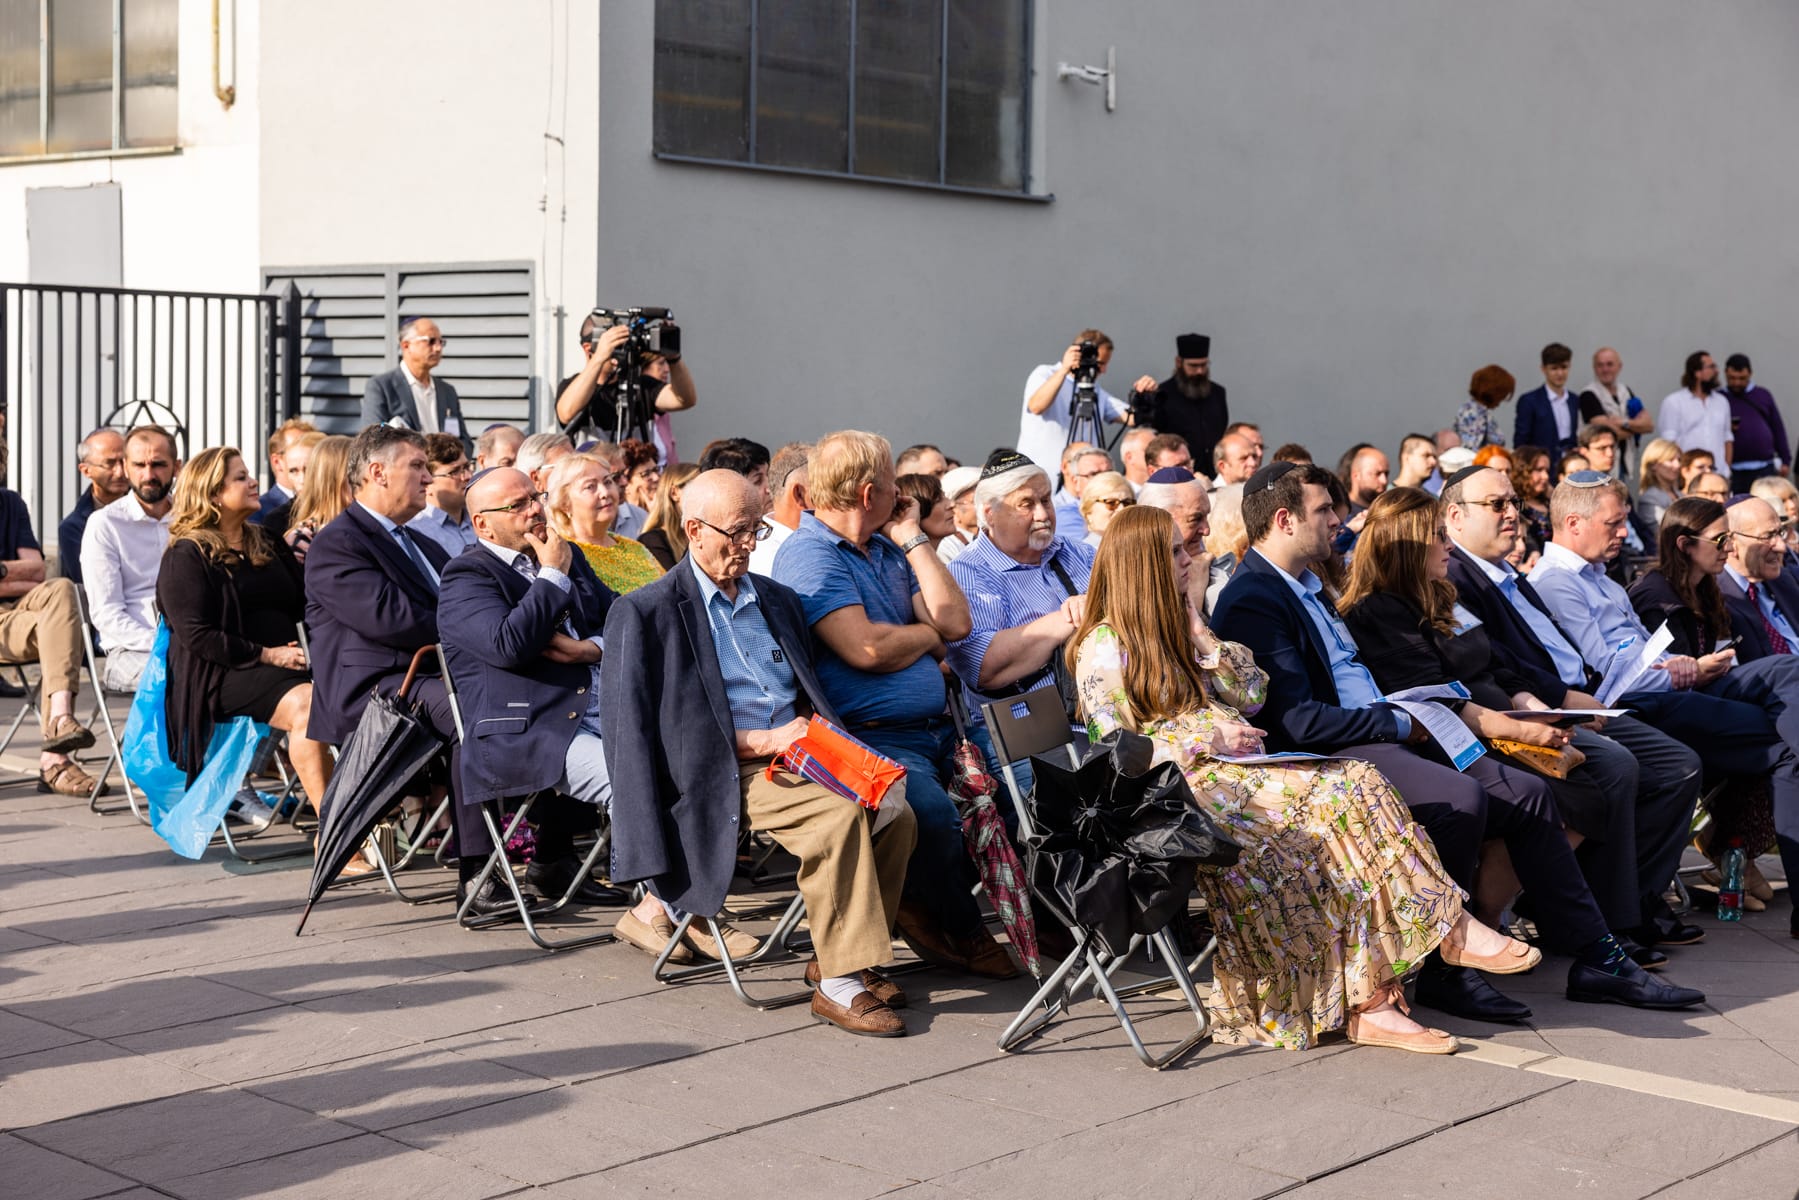 We were pleased to welcome descendants, students, religious representatives, city officials and members of Bardejov parliament, and local Bardejov residents.